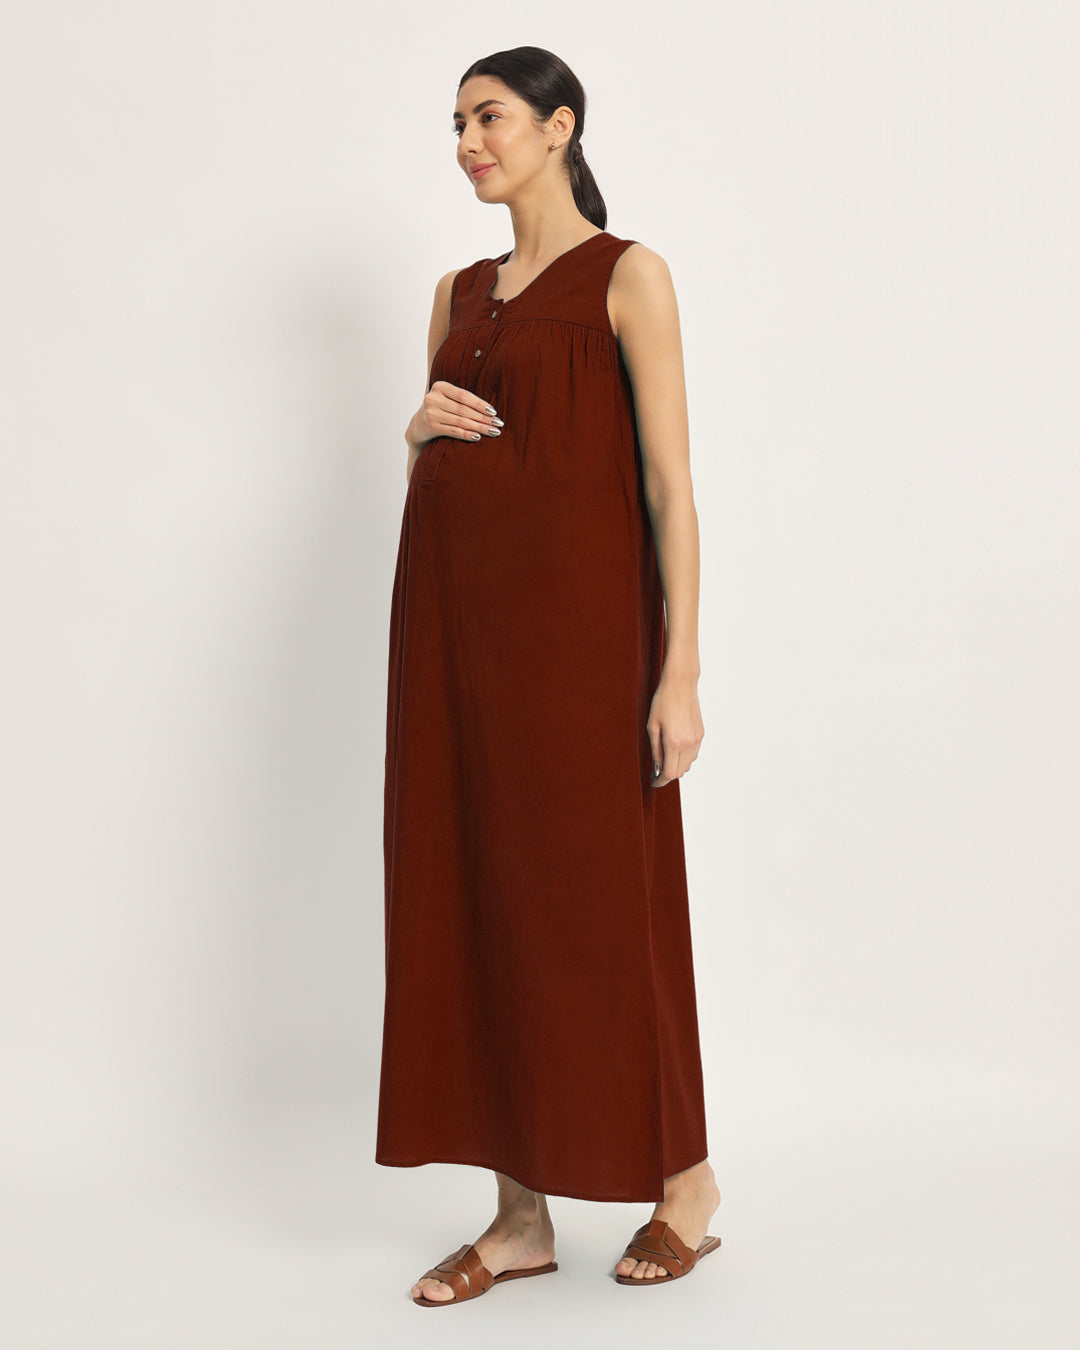 Russet Red Mommylicious Maternity & Nursing Dress